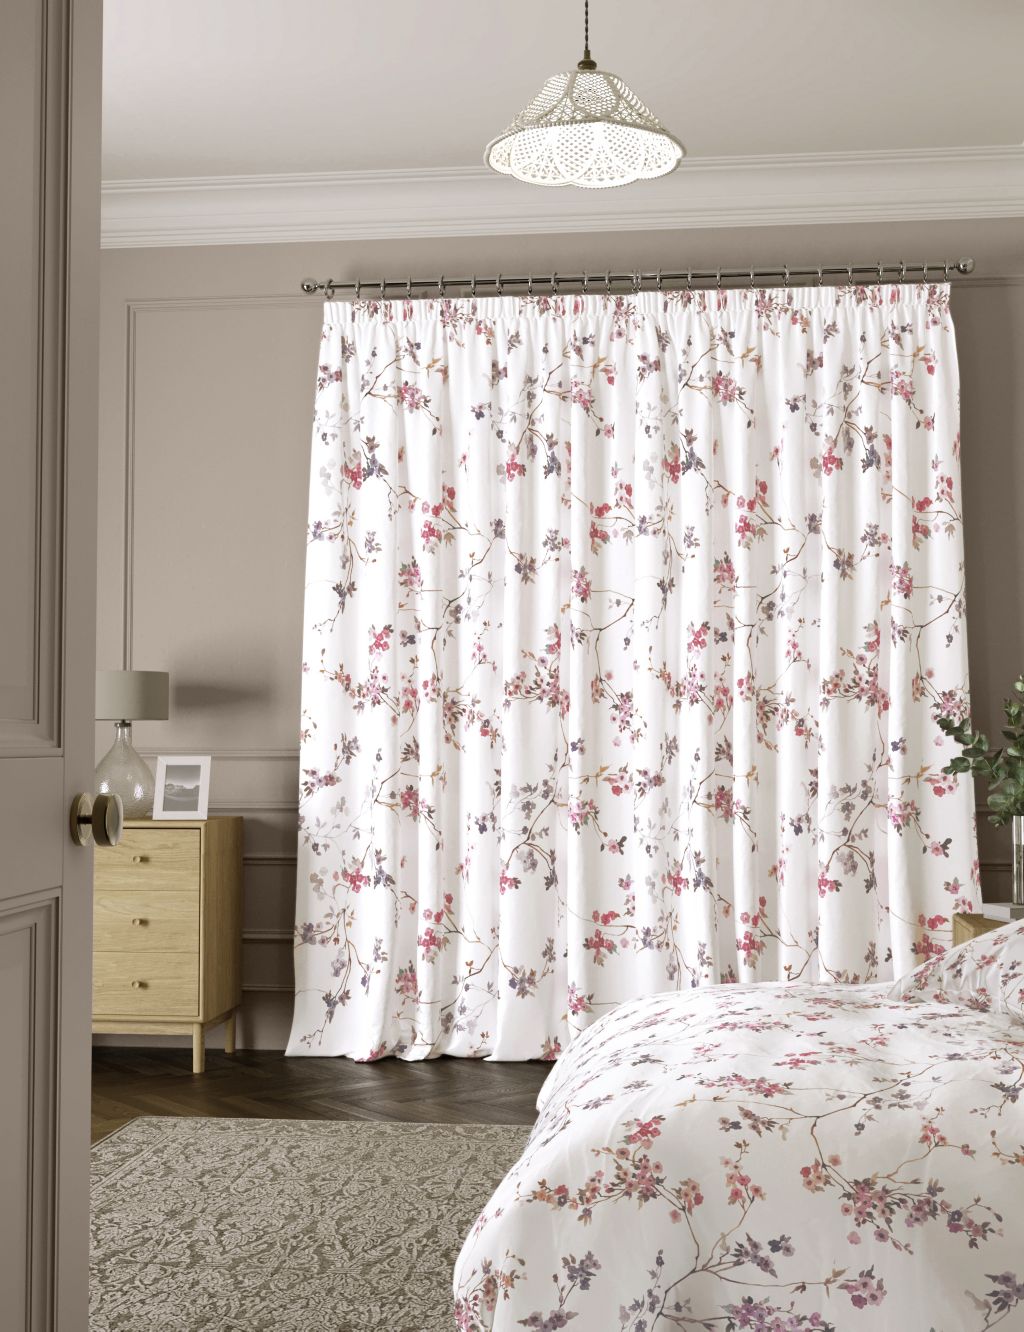 Sateen Cherry Blossom Pencil Pleat Blackout Curtains image 4